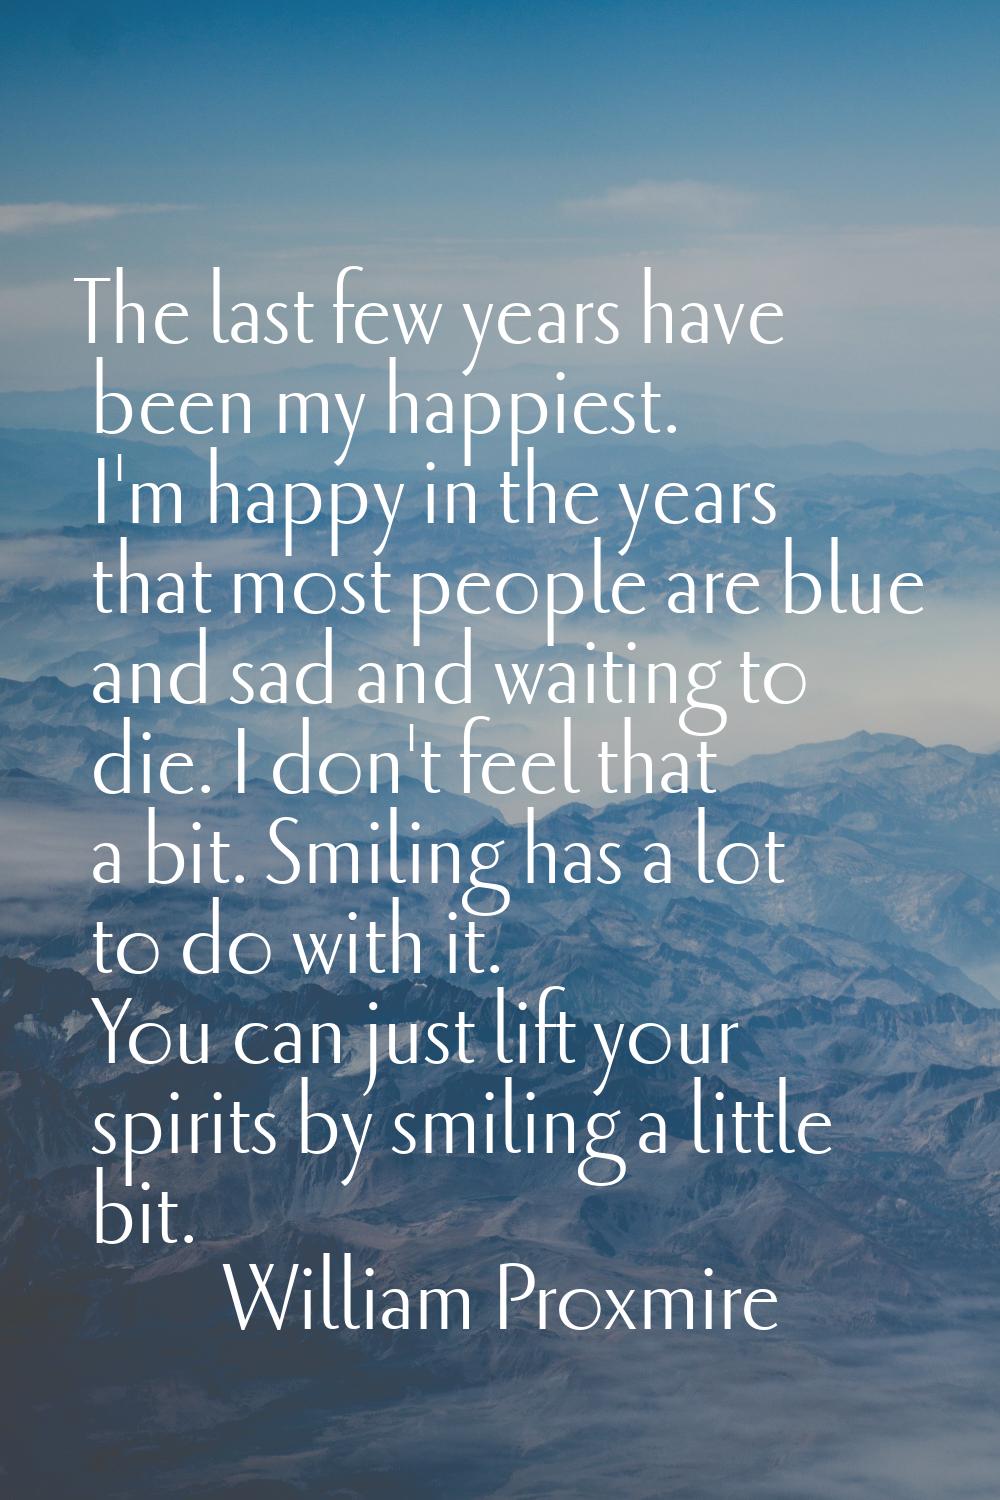 The last few years have been my happiest. I'm happy in the years that most people are blue and sad 